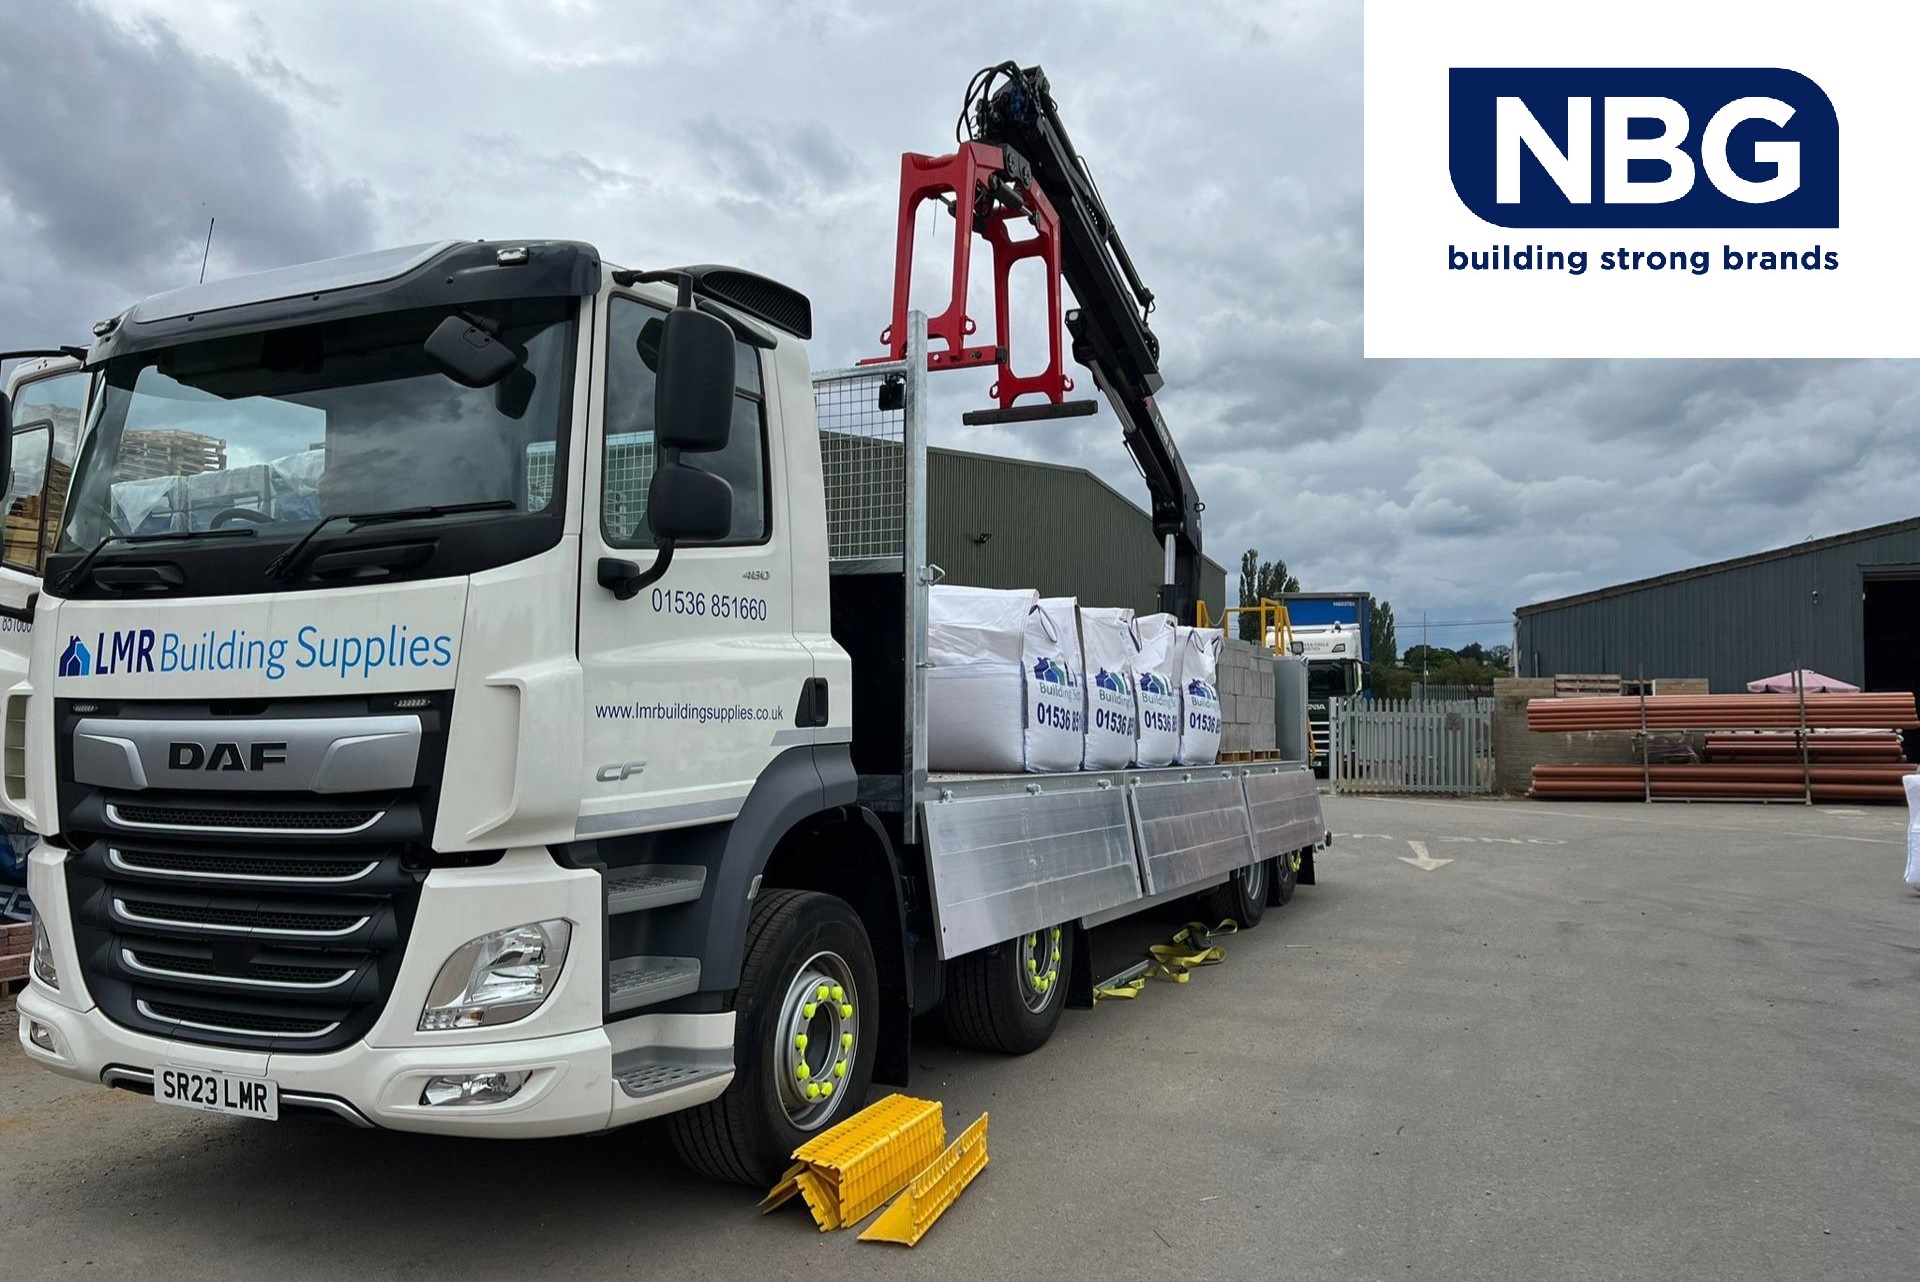 LMR Building Supplies branches into timber with support from NBG